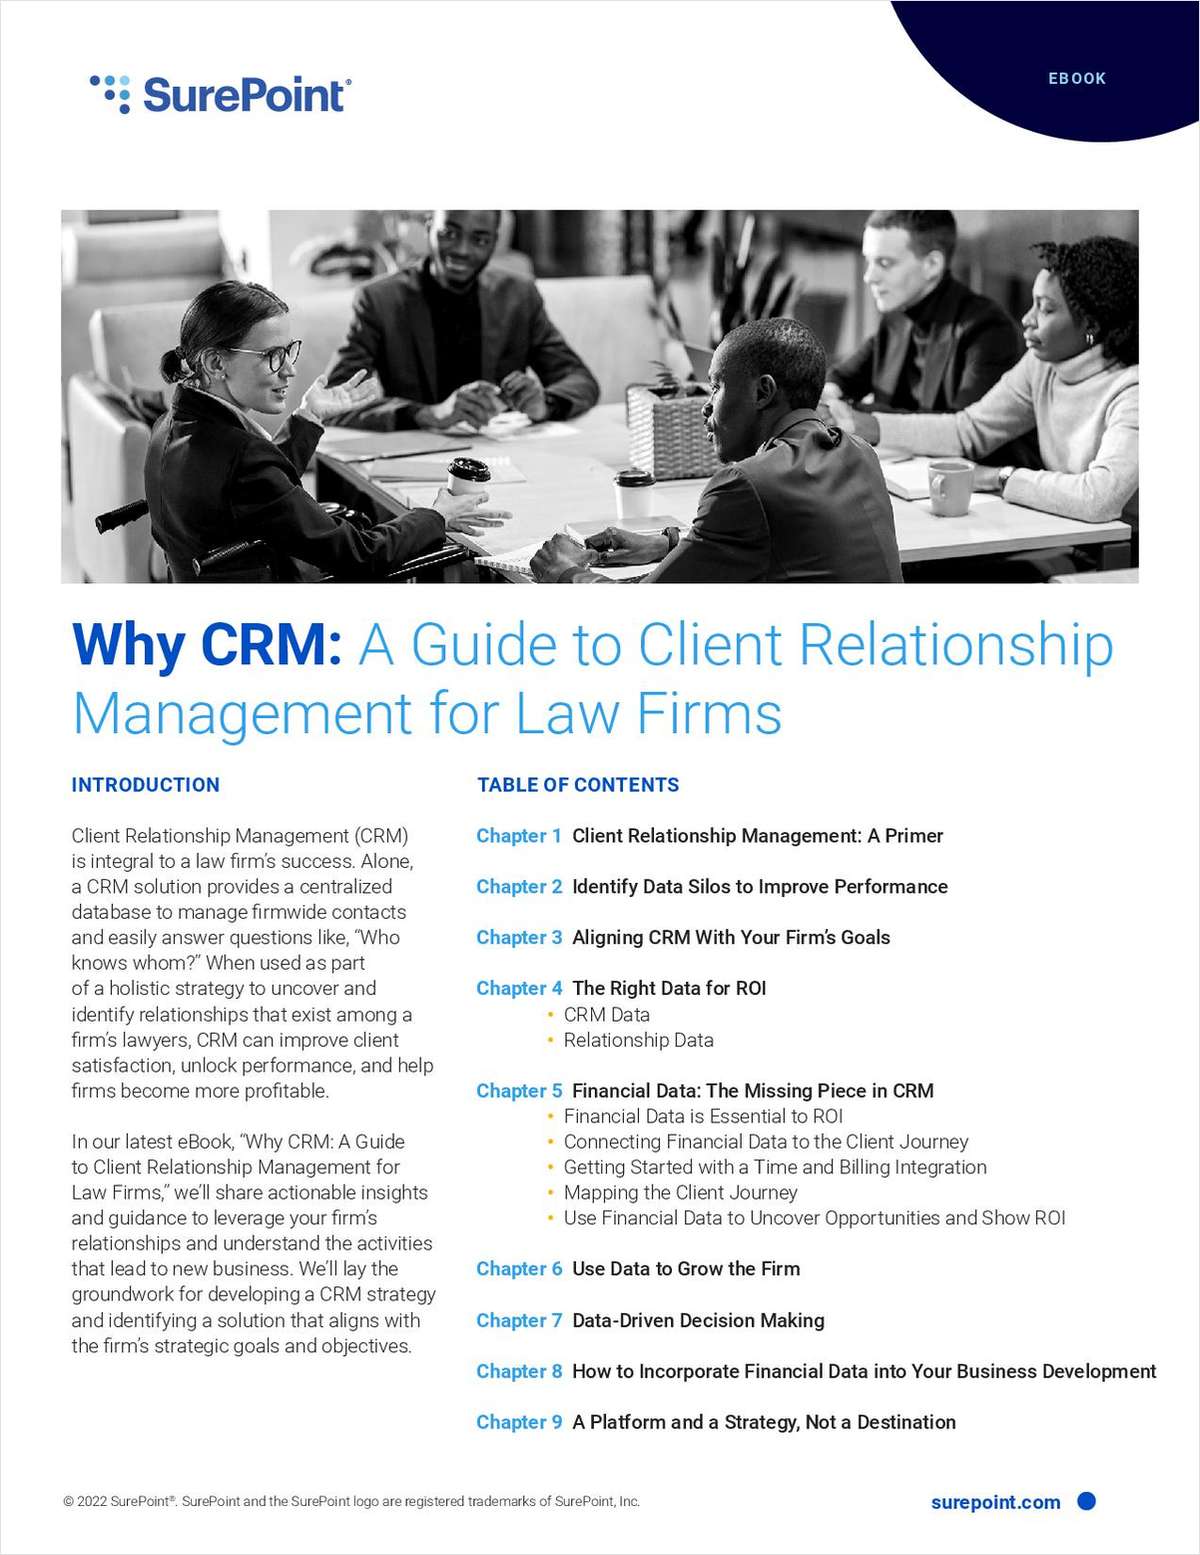 Download this eBook where you'll find actionable insights and expert guidance on harnessing your firm's relationships, identifying key activities that lead to new business, and developing a CRM strategy that aligns with your firm's strategic goals.